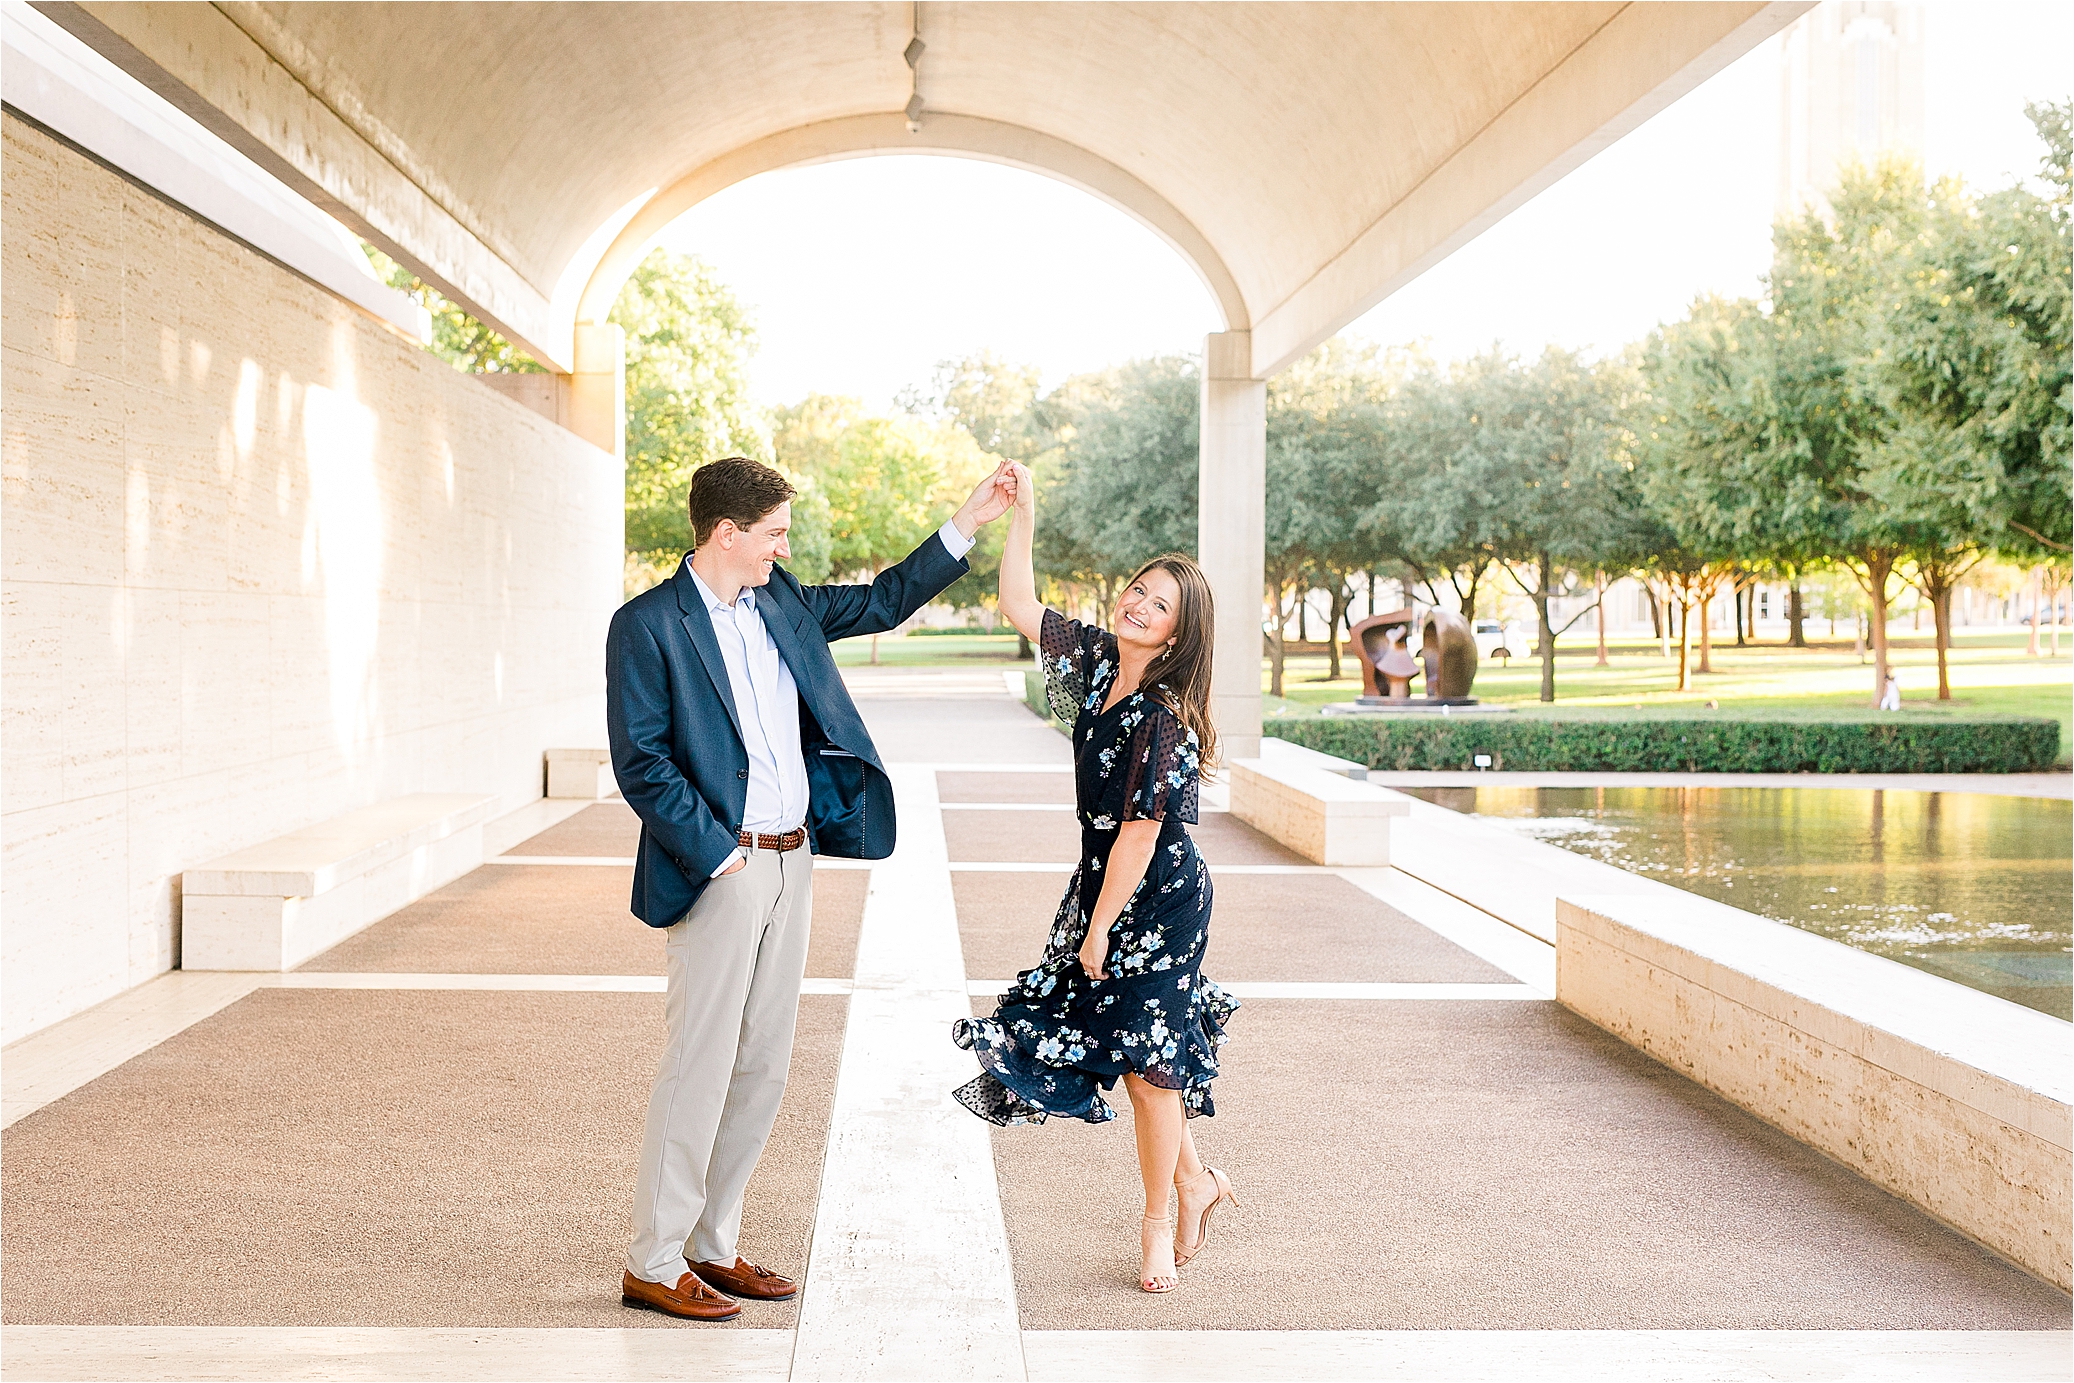 Dancing during their engagement session at The Kimball Art Museum in Fort Worth, Texas by DFW Wedding Photographer Jillian Hogan